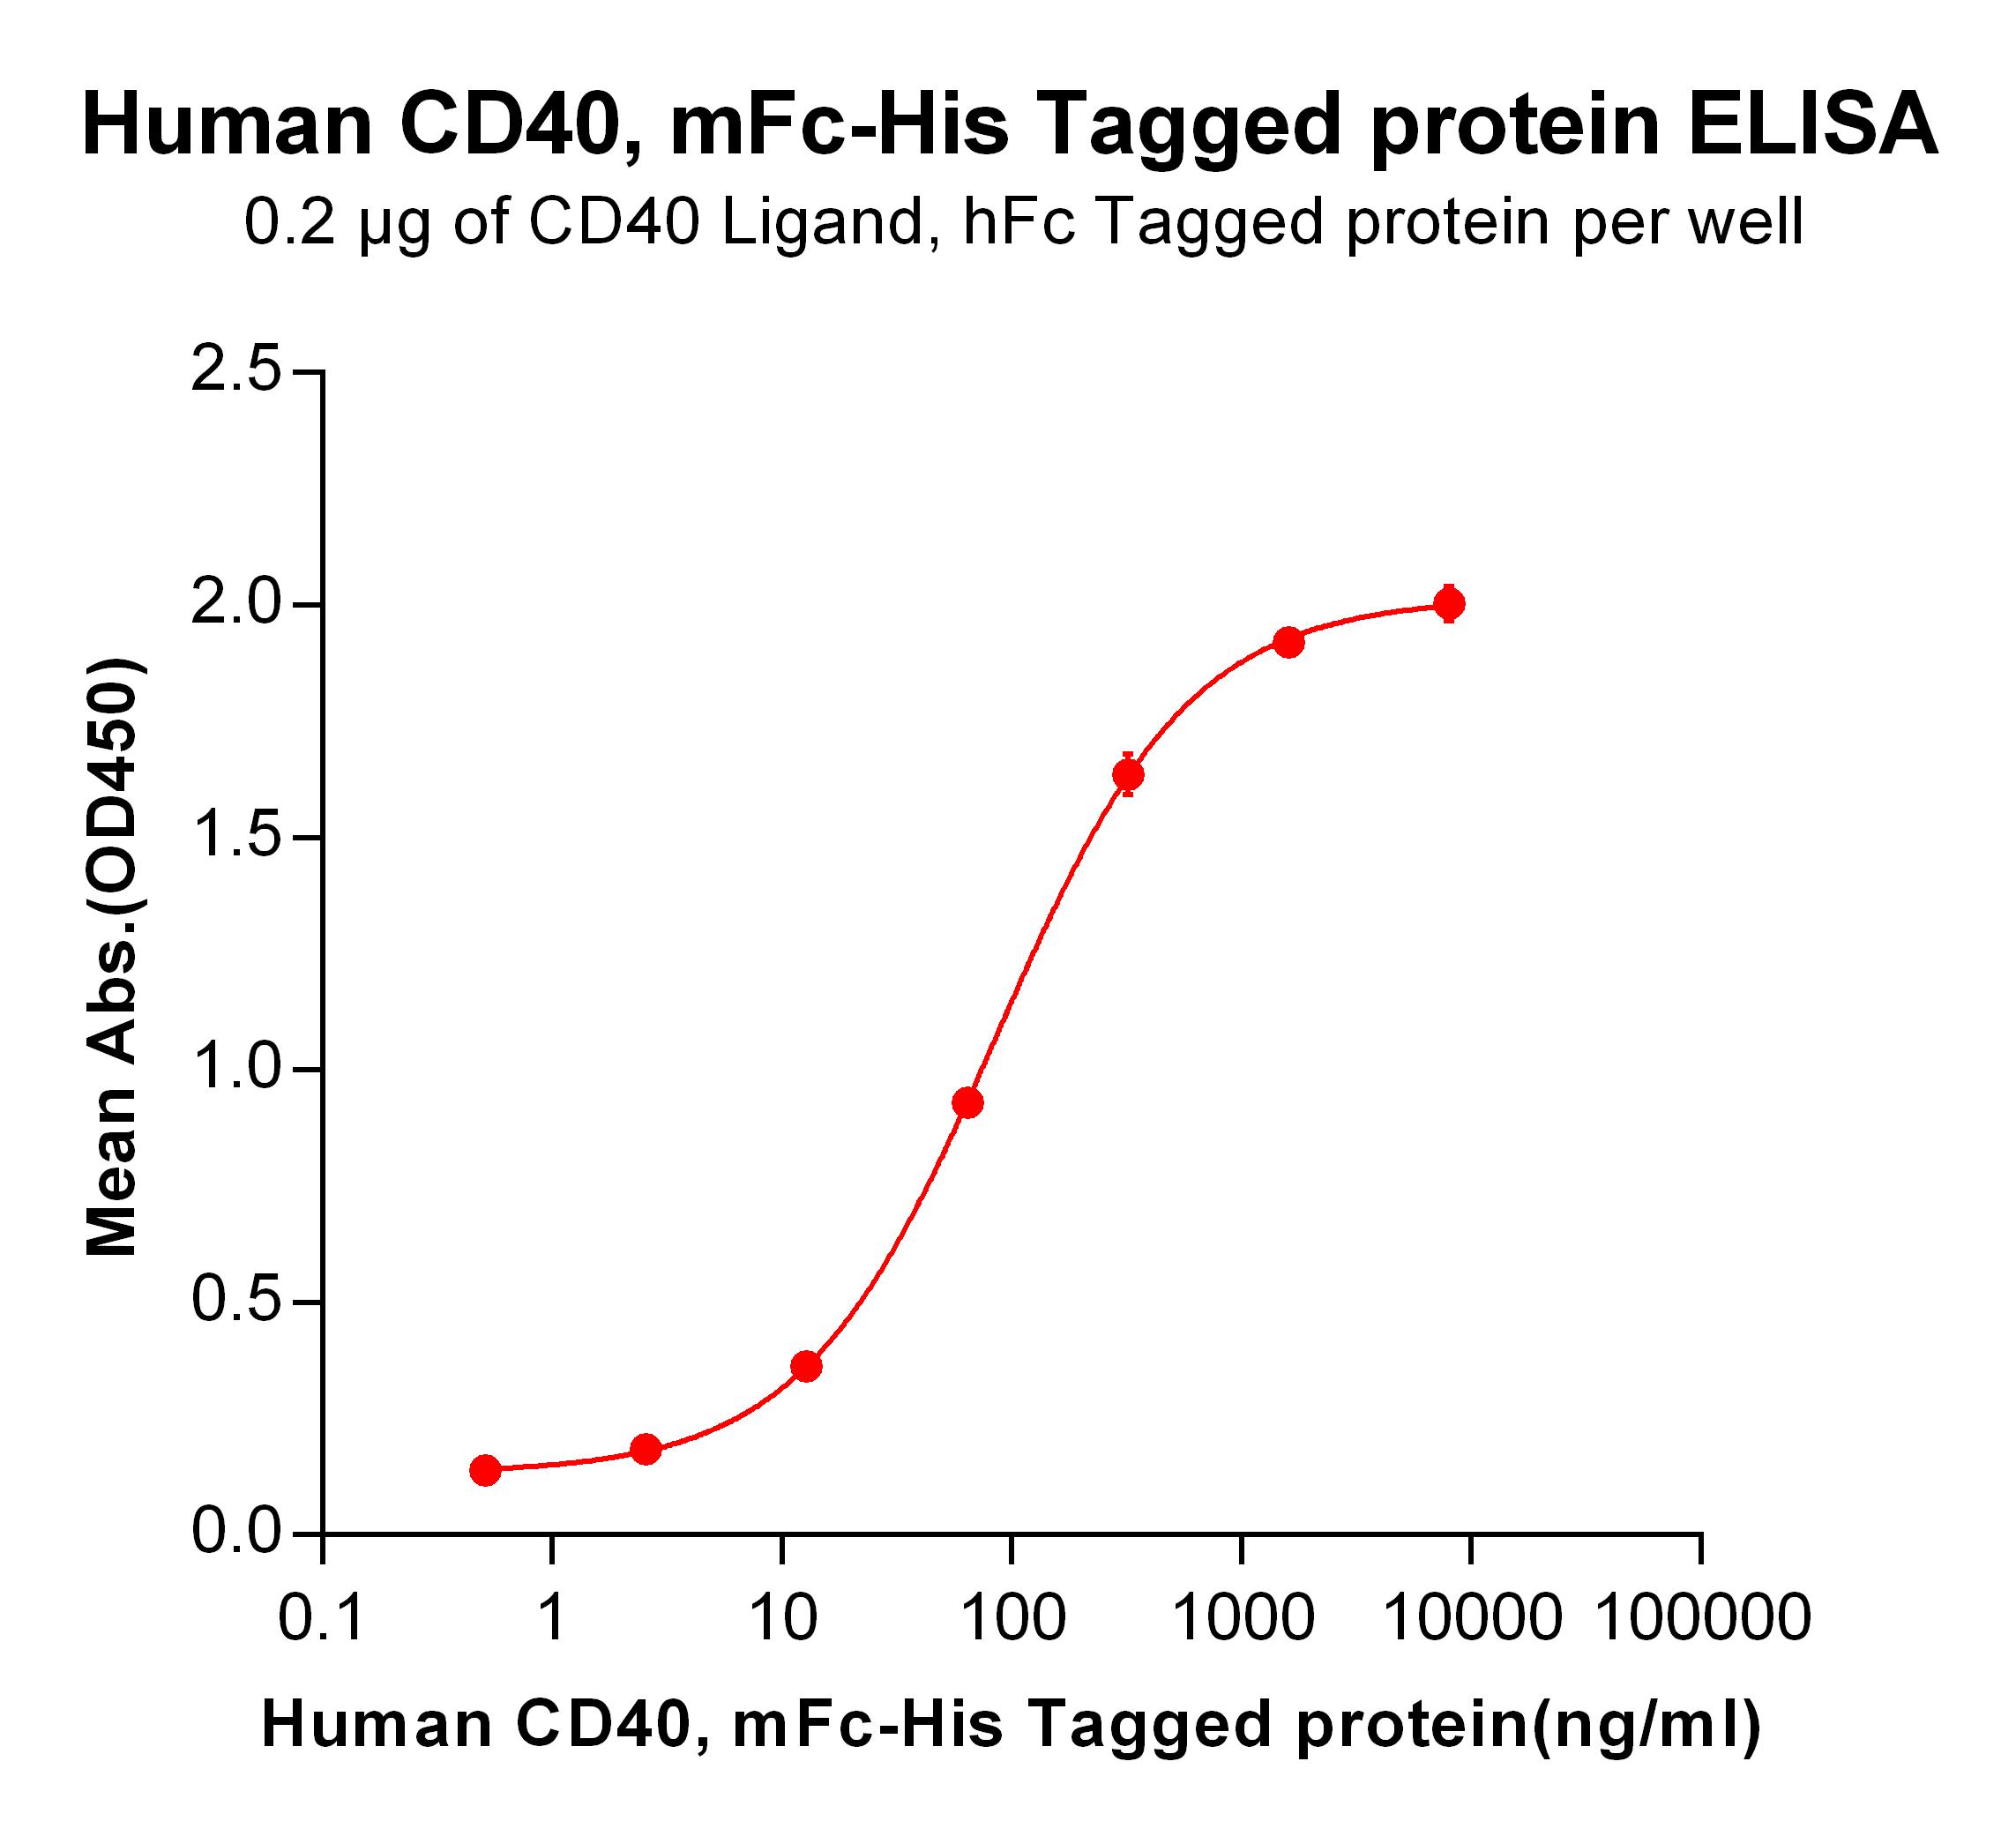 Figure 3. ELISA plate pre-coated by 2 µg/ml (100 µl/well) Human CD40 Ligand,hFc tagged protein  can bind Human CD40, mFc-His tagged protein  in a linear range of 0.51-320 ng/ml.